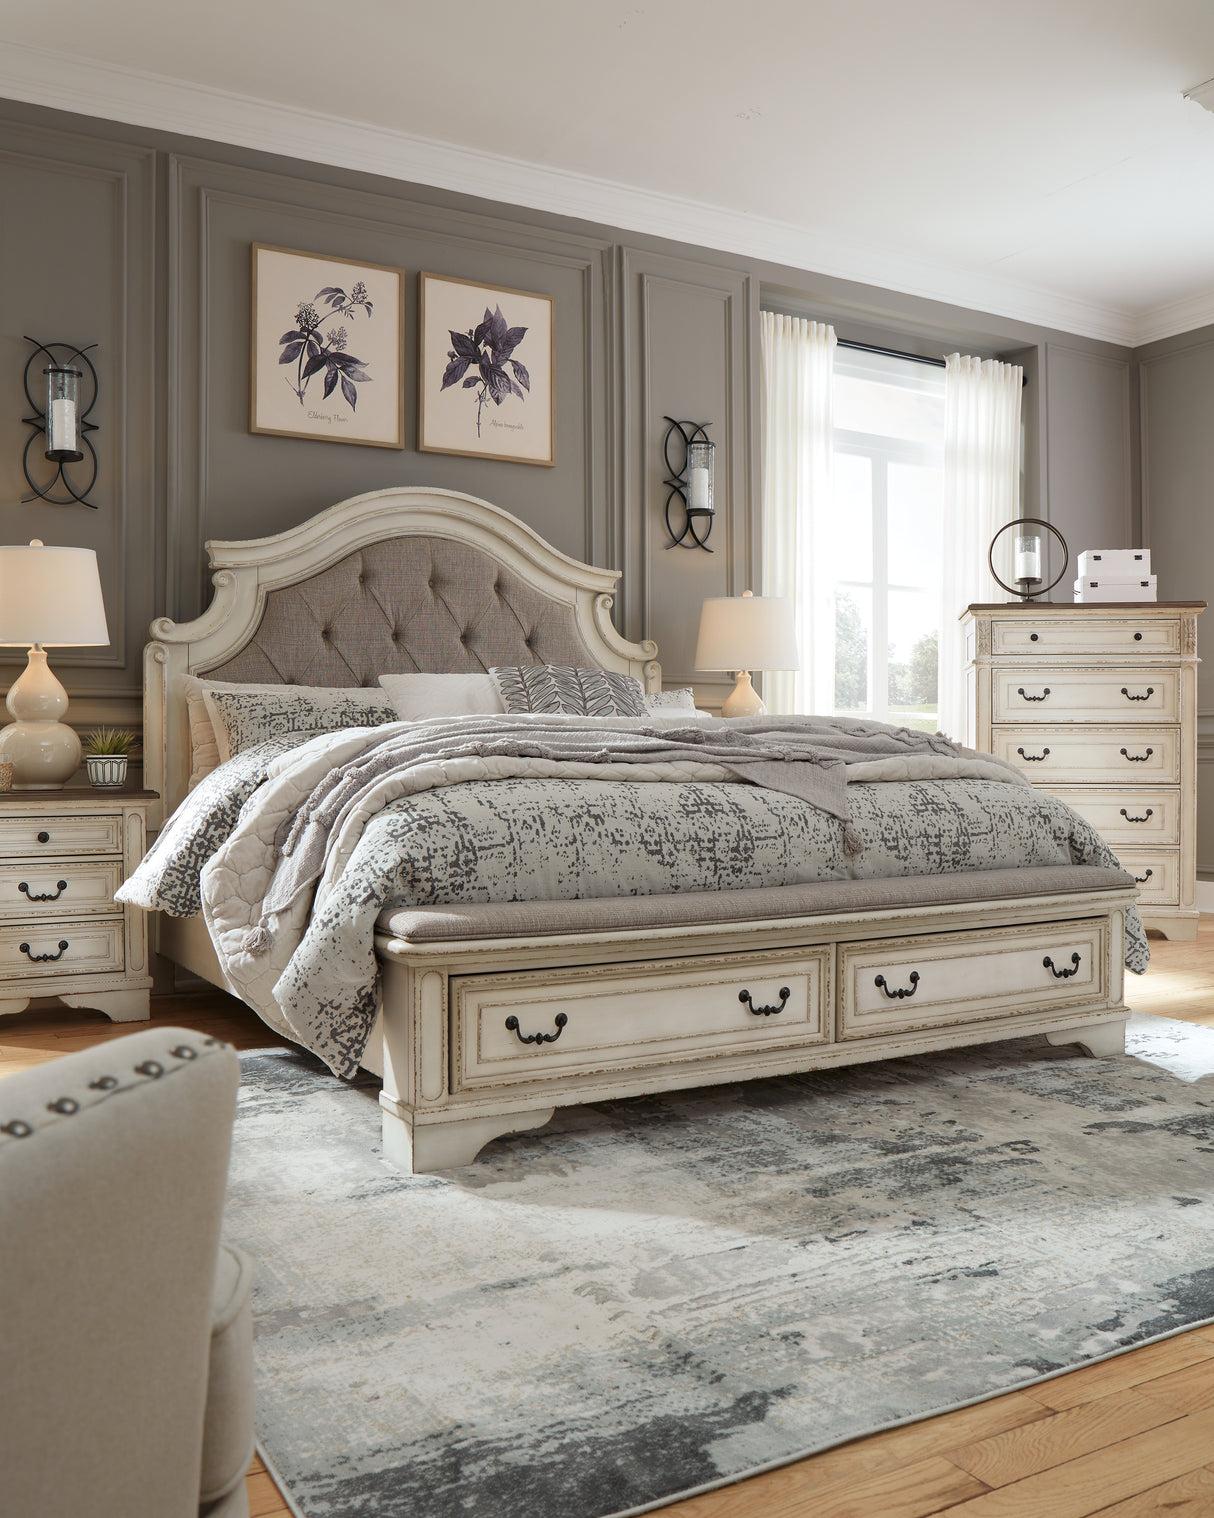 Realyn Two-Tone King Upholstered Bed